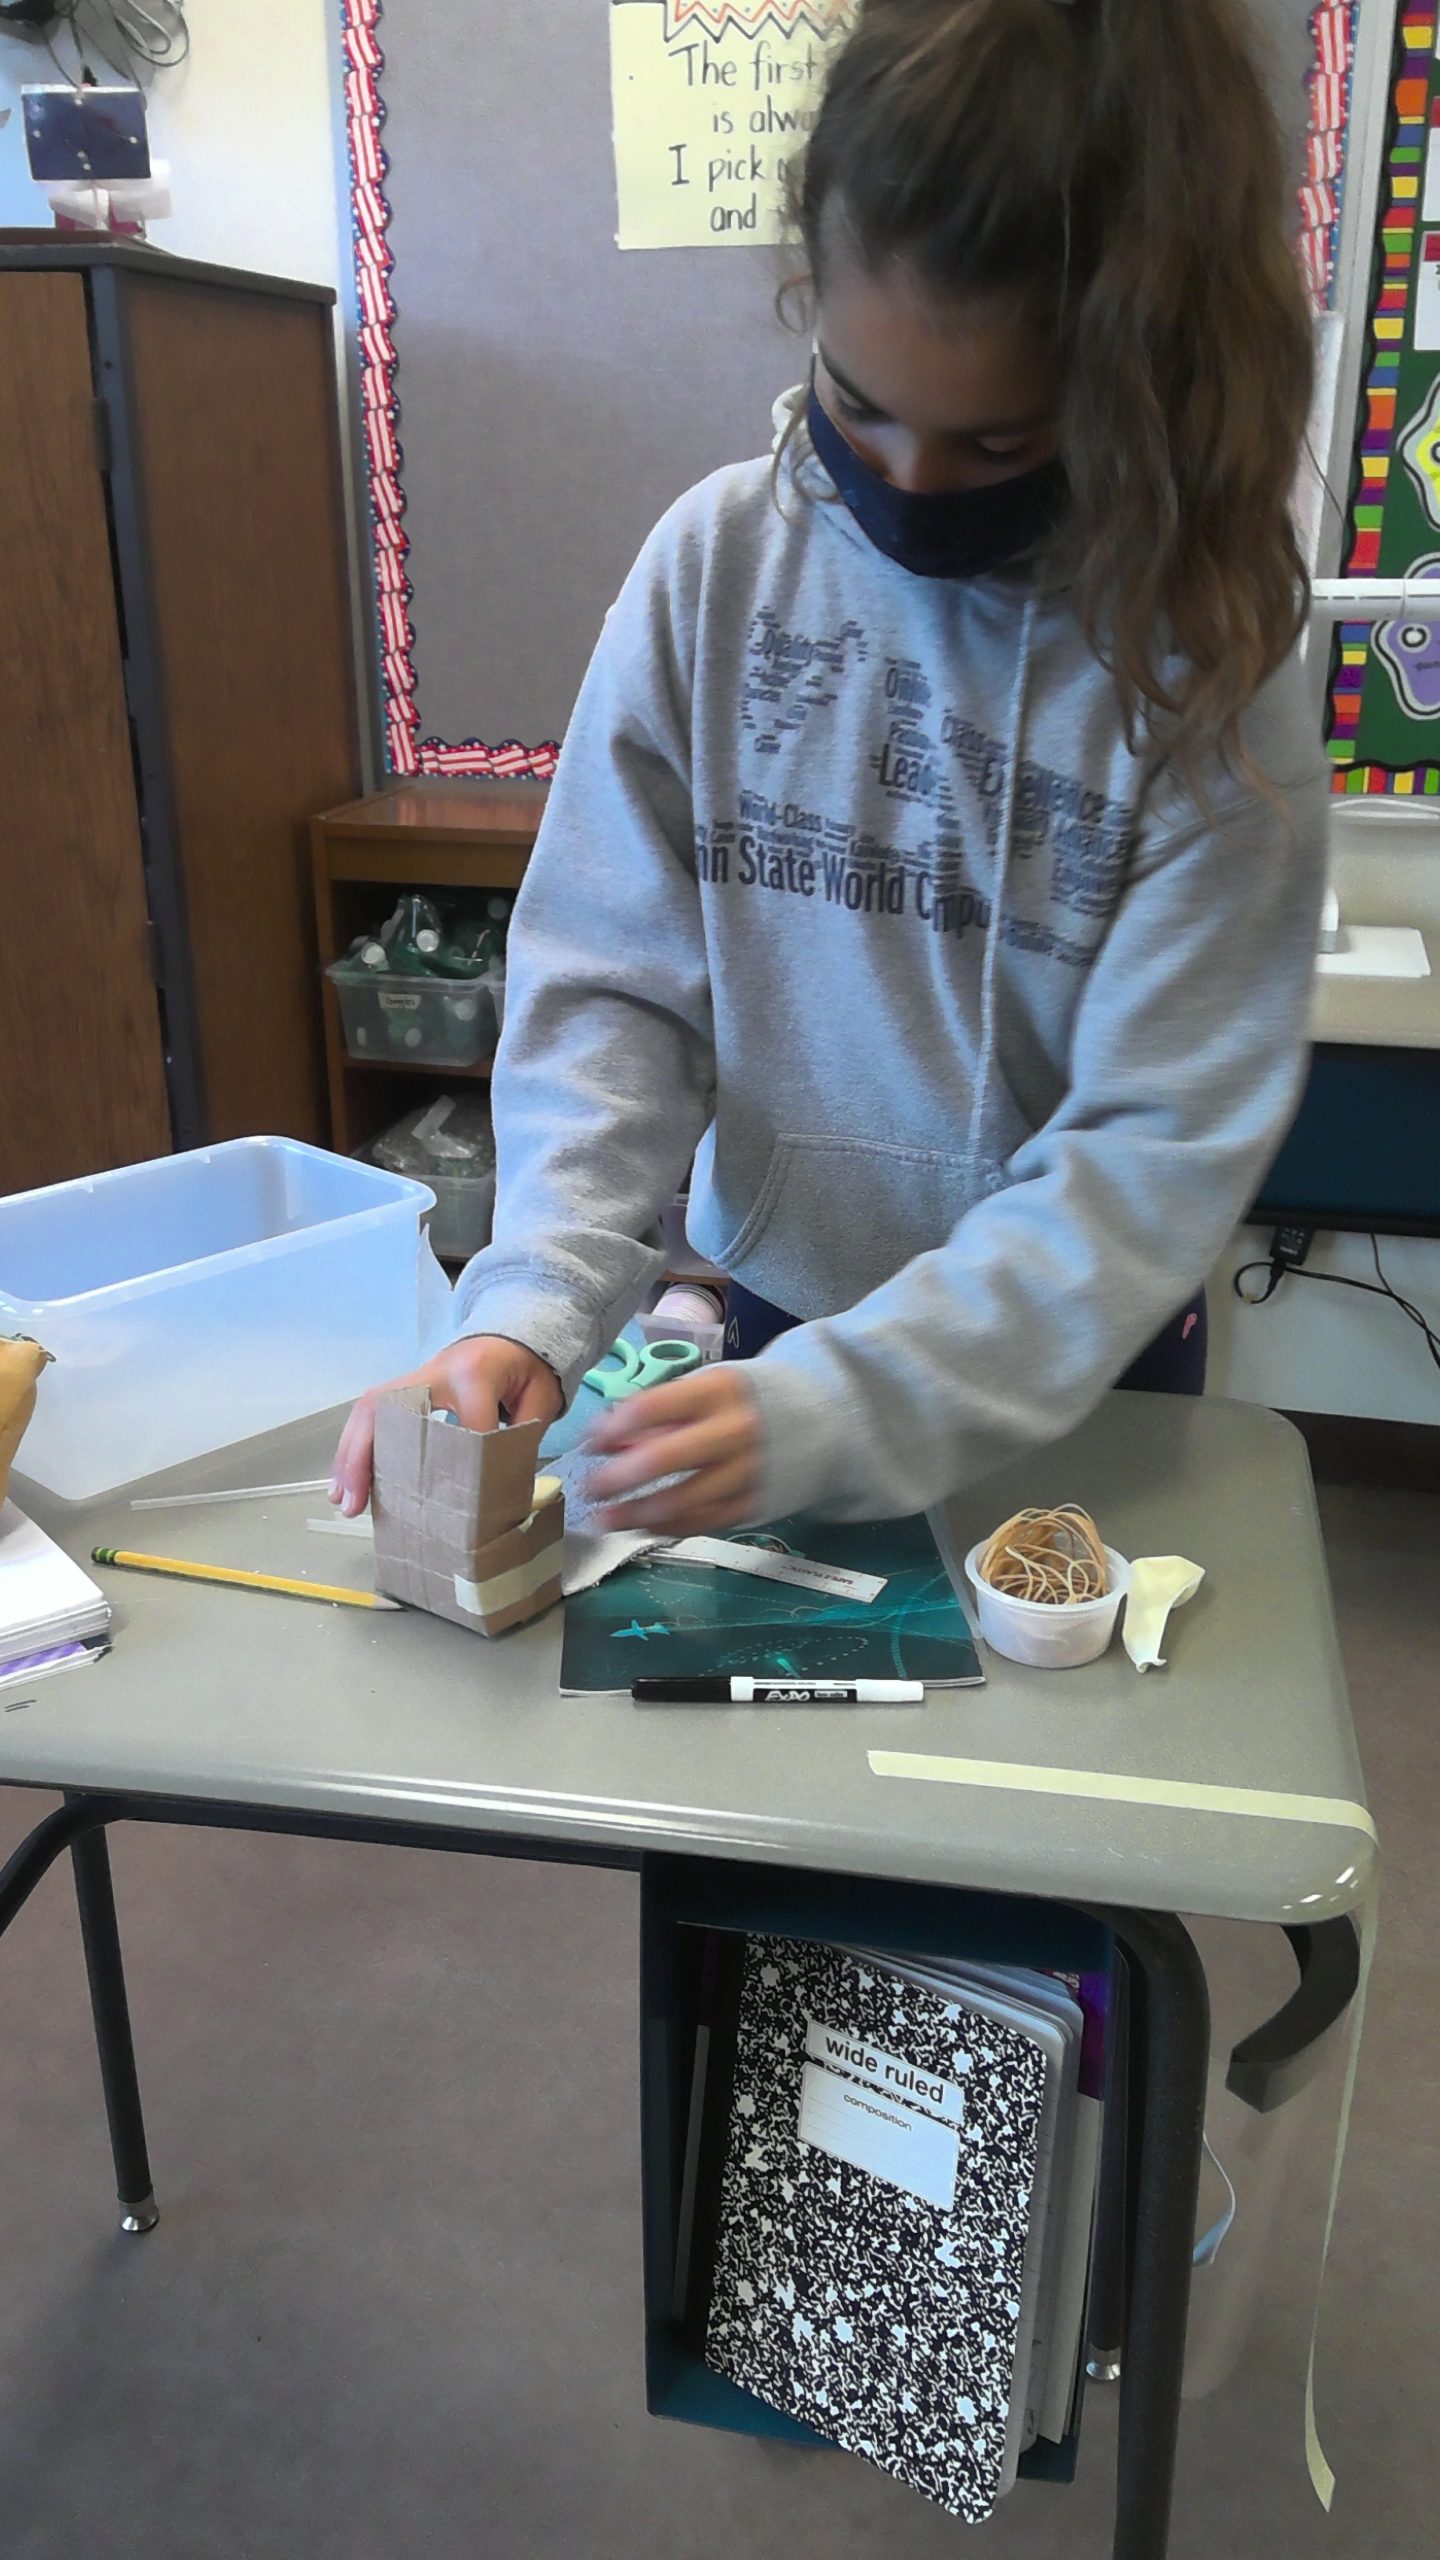 Students at the Tuckahoe School are learning about science through observation and experimentation. Students are applying the scientific method and the design process to design, build, and test an egg protection device. Testing and redesign will follow.